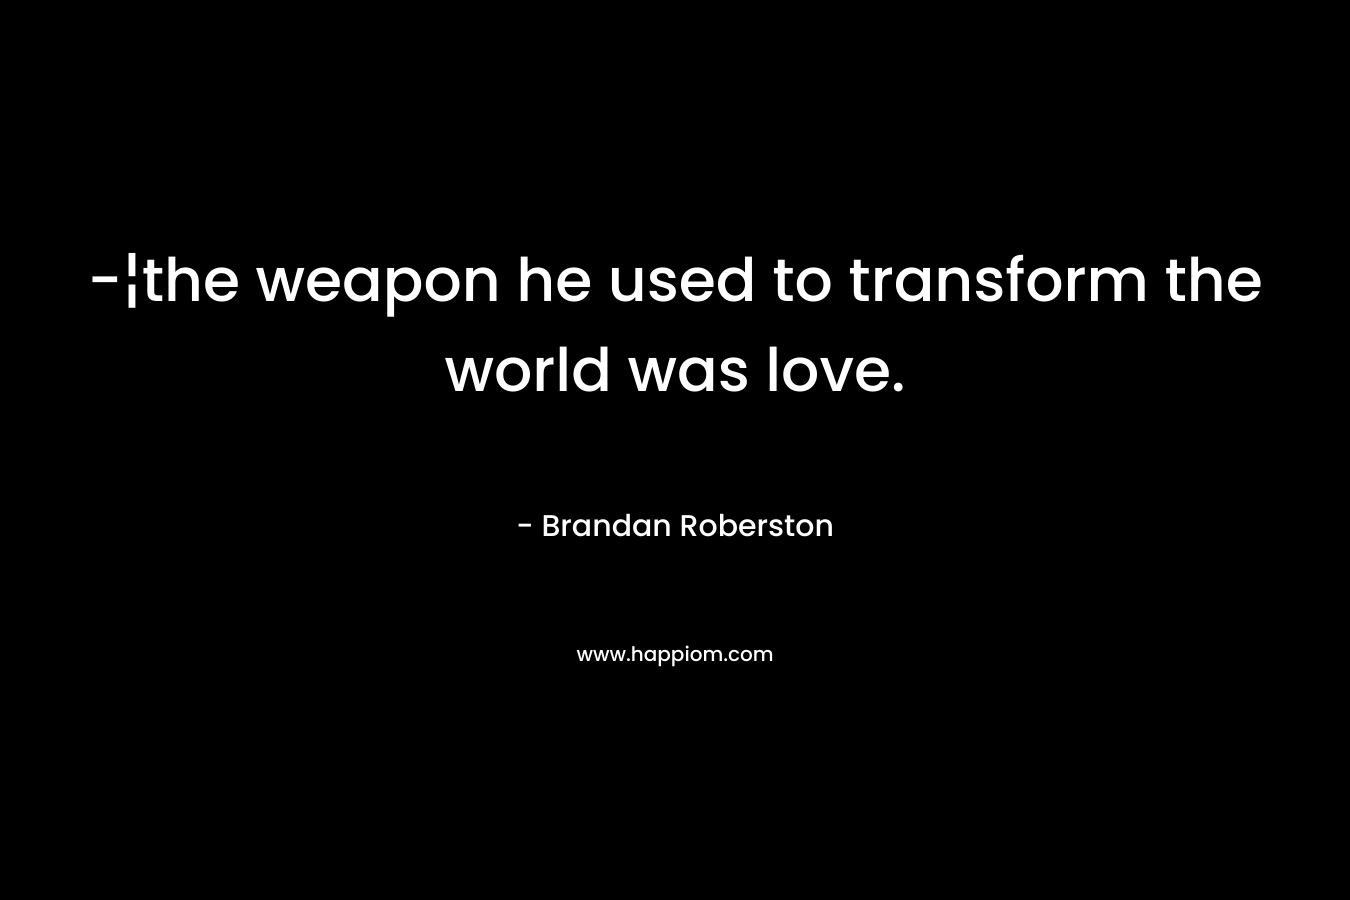 -¦the weapon he used to transform the world was love.